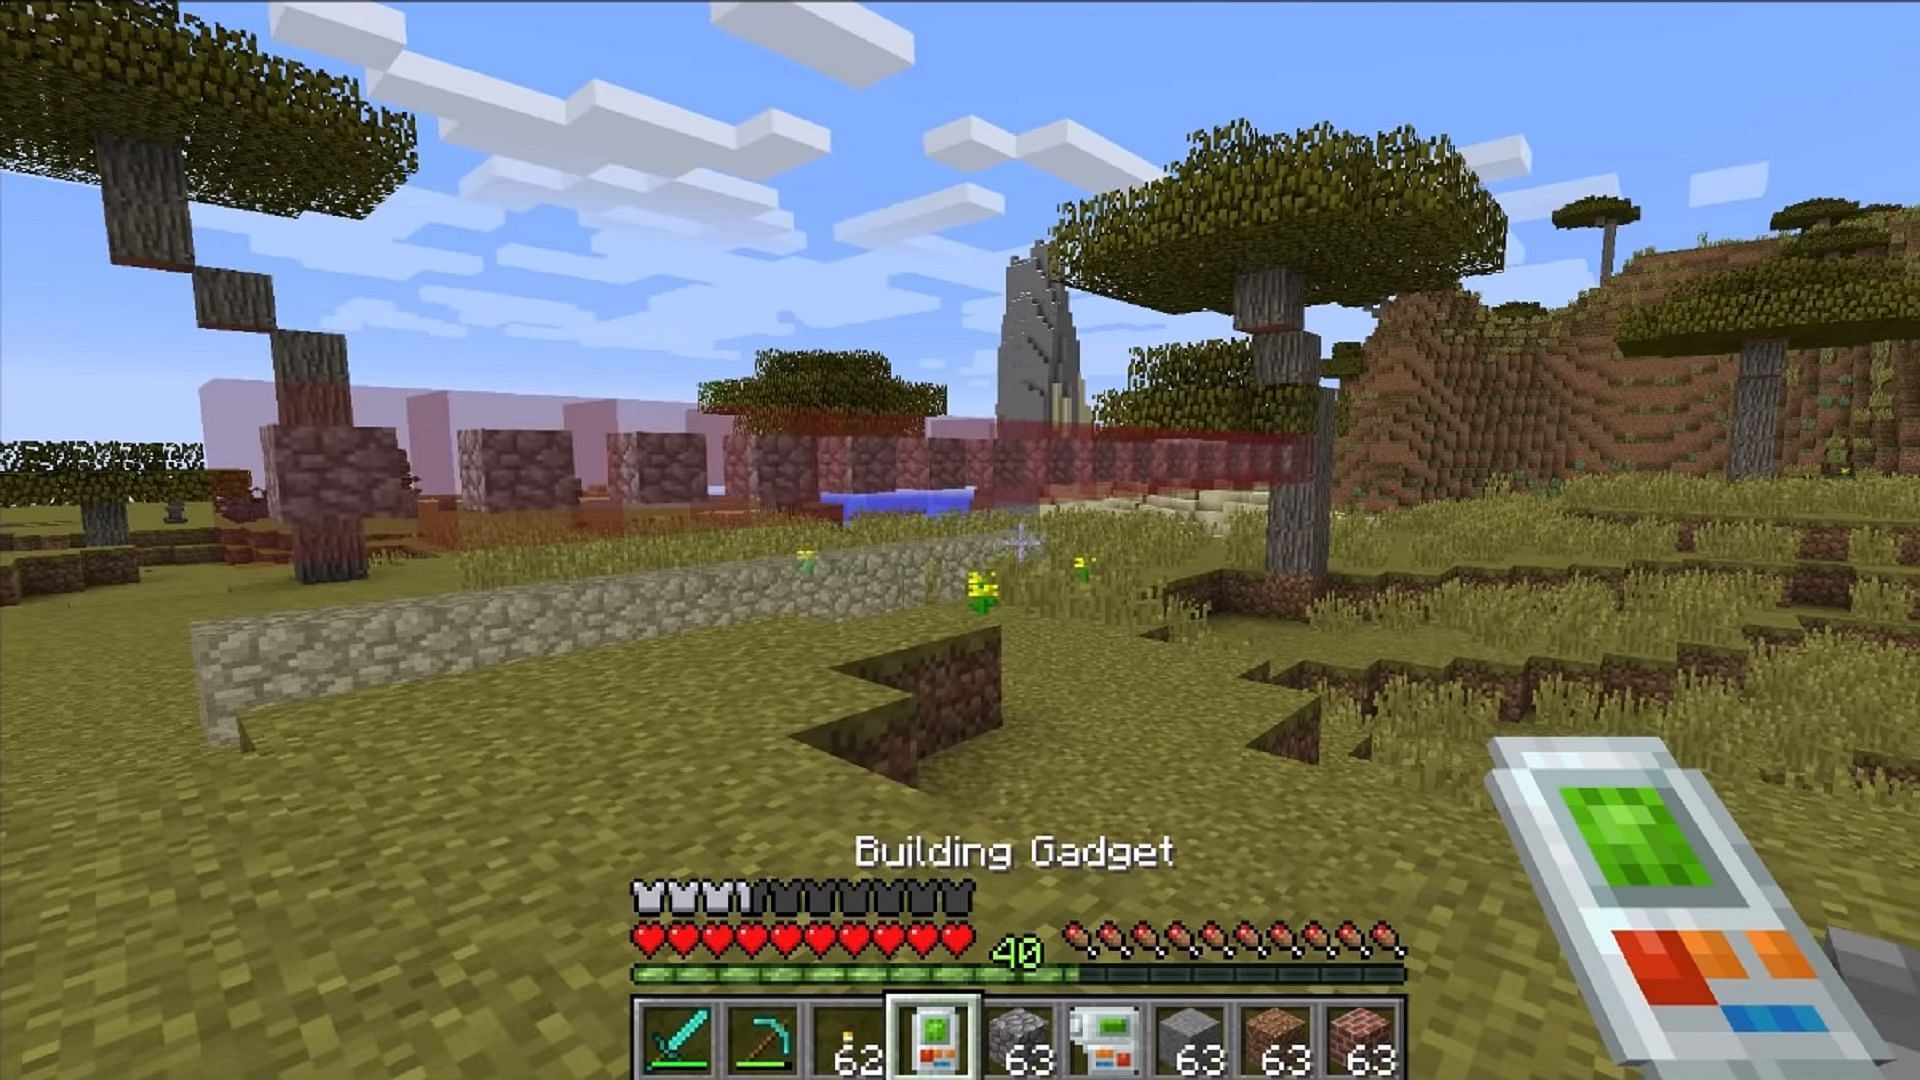 Building Gadgets makes creating Minecraft builds much easier (Image via Direwolf20/YouTube)